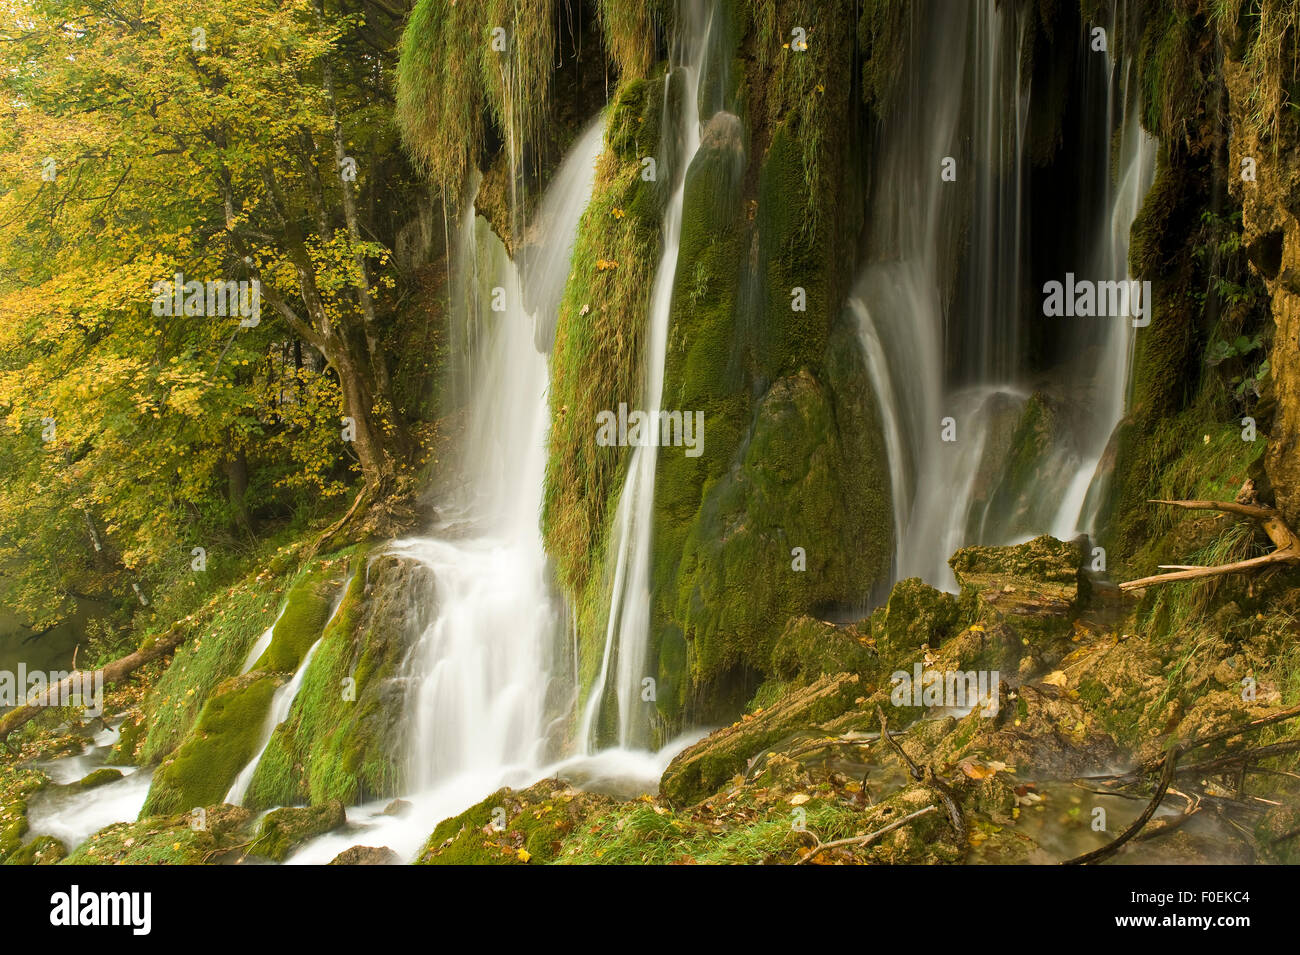 Waterfalls and abundant mosses (Cratoneuron commutatum) and (Bryum ventricosum) growing on the Labudovac barrier, Upper Lakes, Plitvice Lakes National Park, Croatia, October 2008 Stock Photo